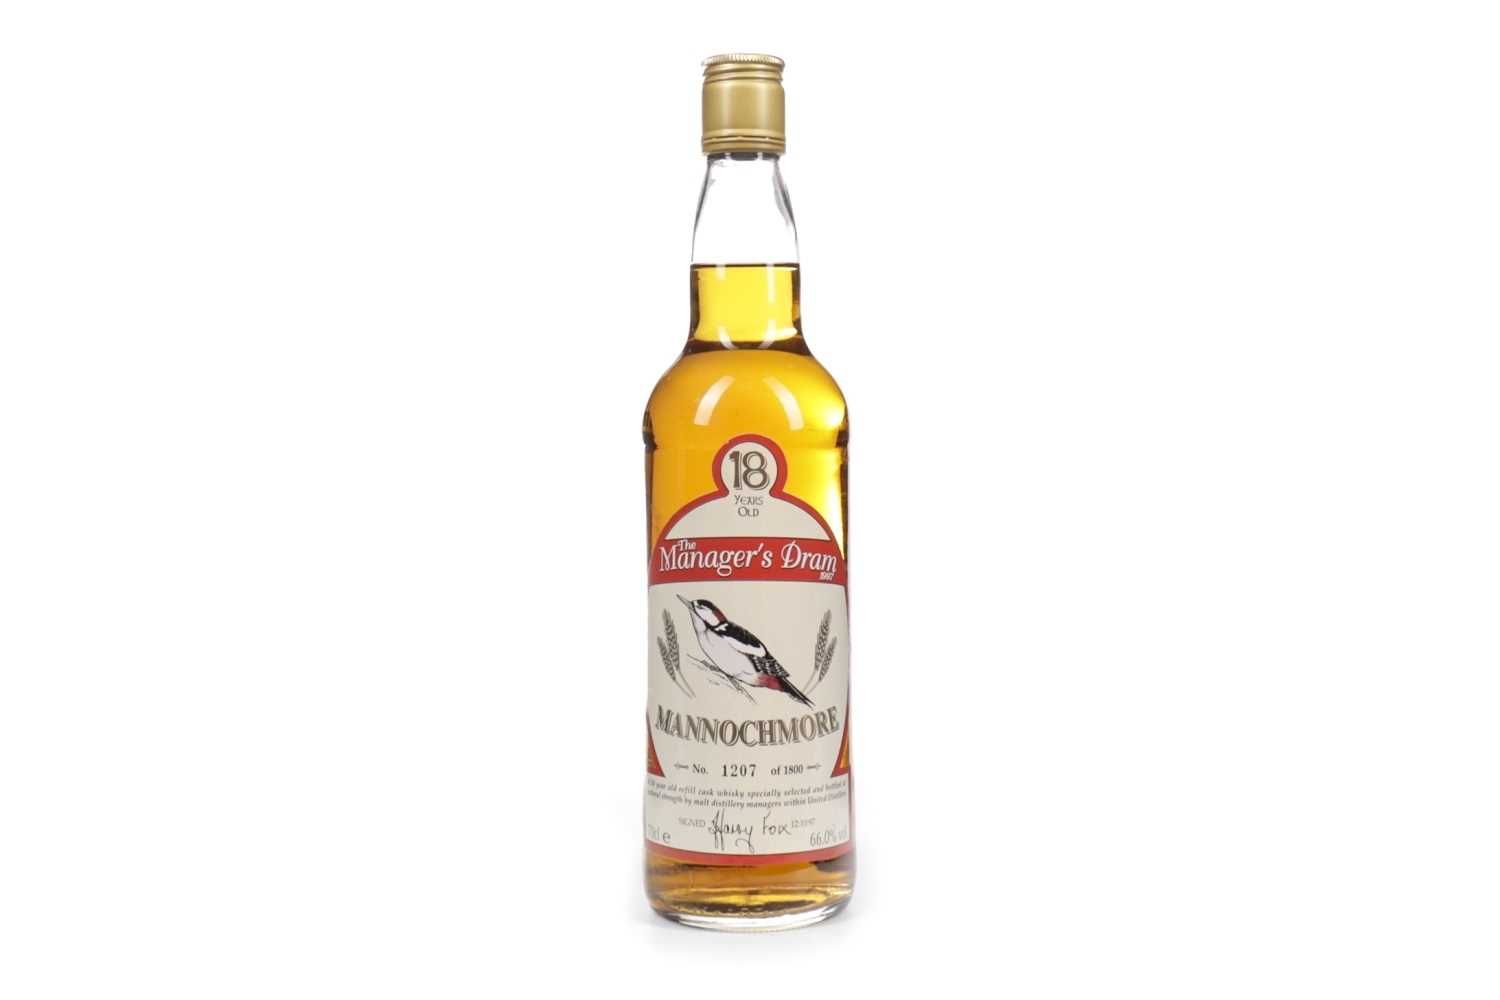 Lot 94 - MANNOCHMORE MANAGERS DRAM AGED 18 YEARS